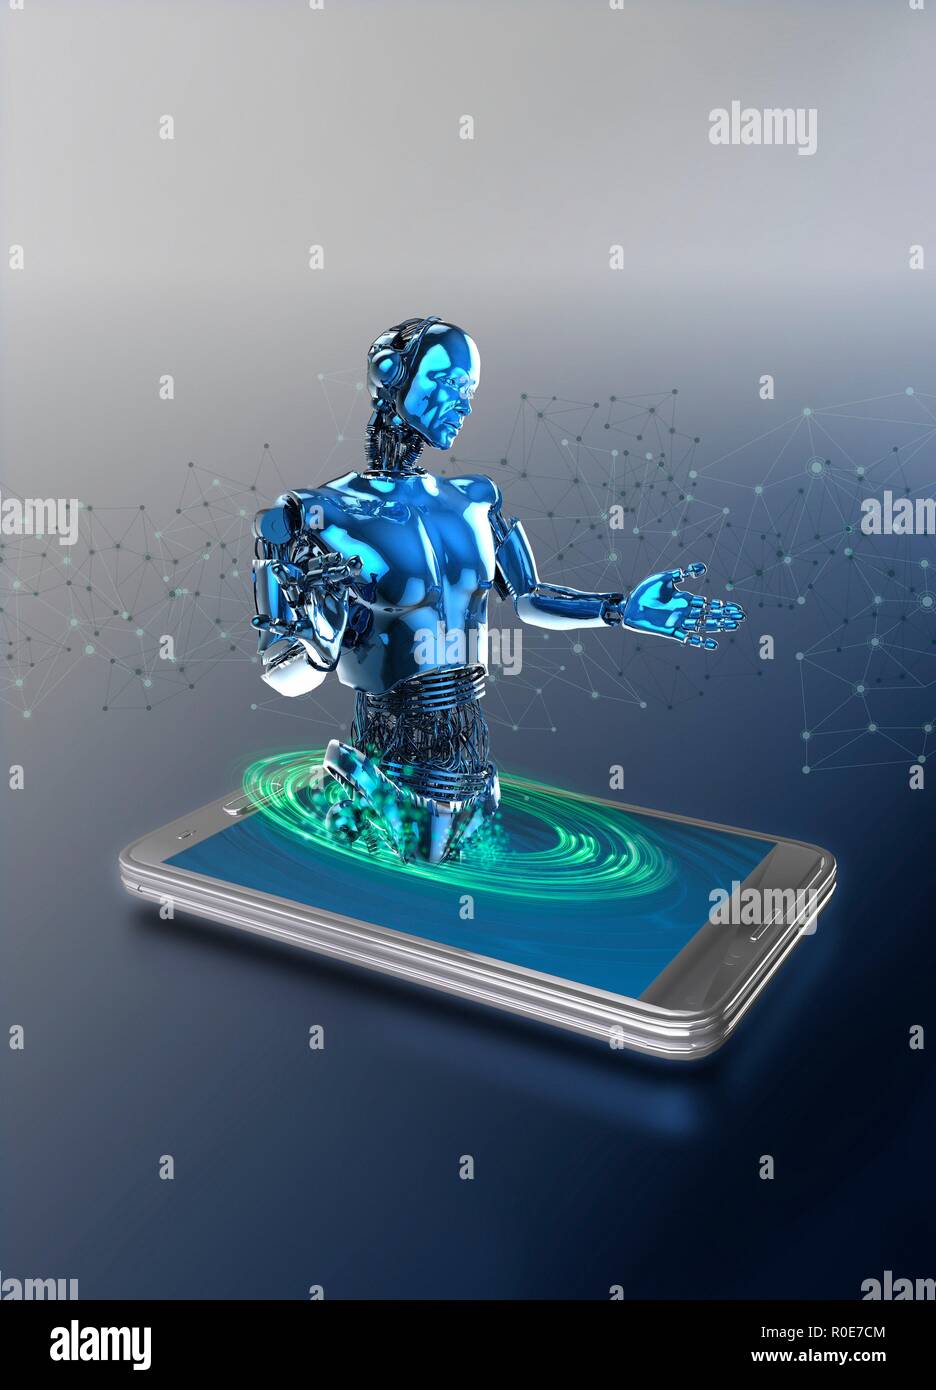 Robot emerging from smartphone screen, illustration. Stock Photo